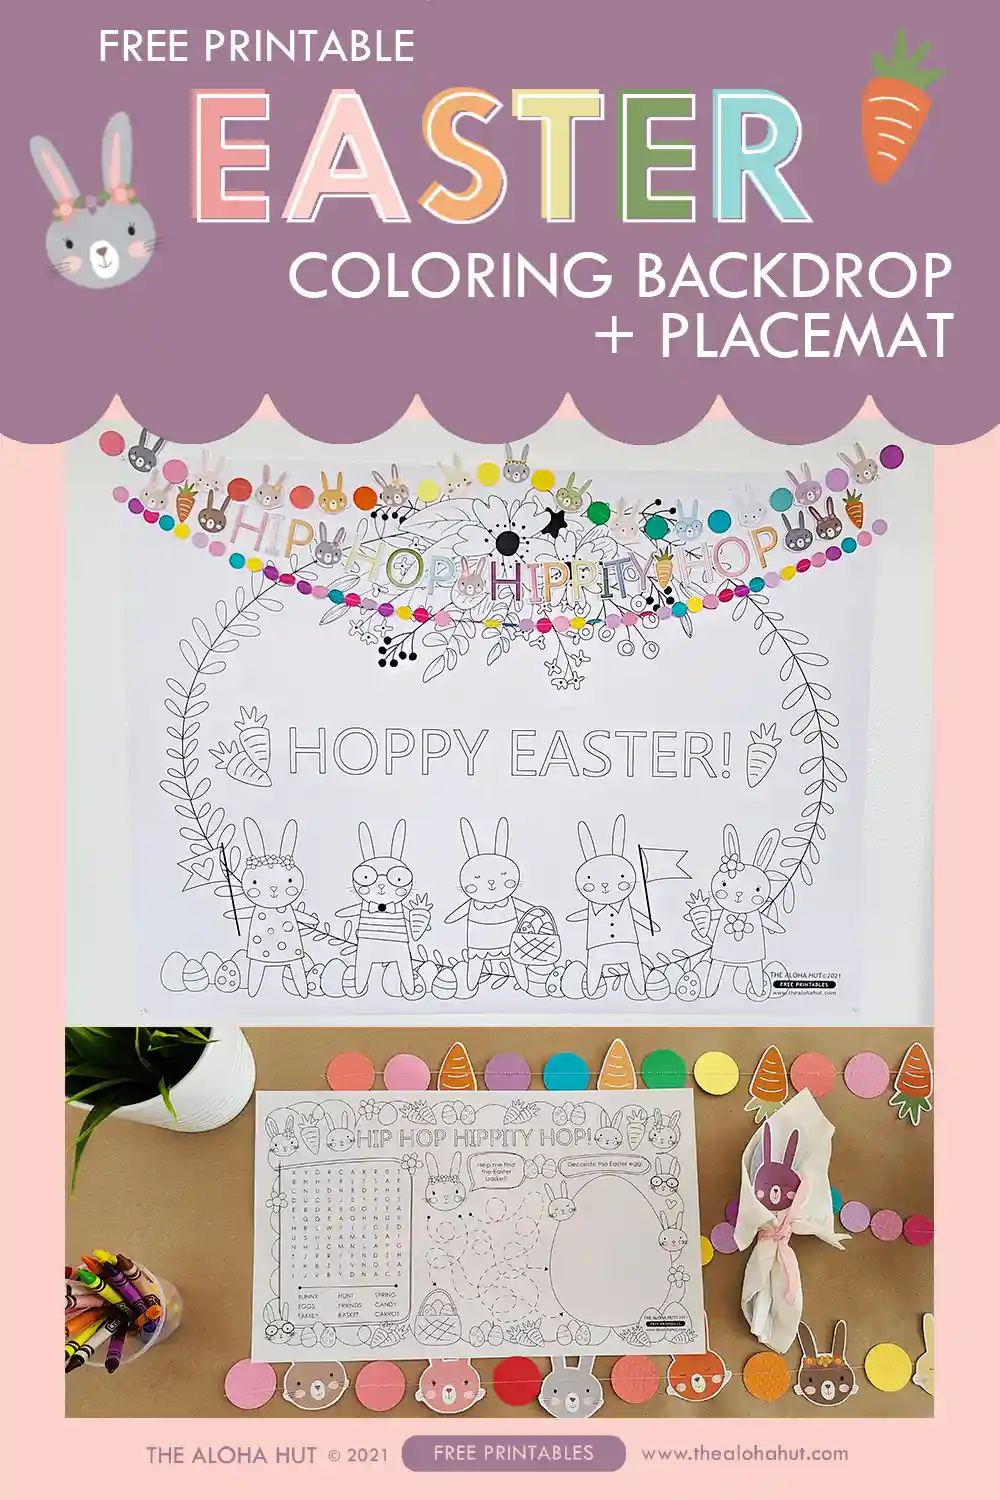 Printable giant Easter poster and Easter placemat coloring page and kids activity page to help you throw the perfect Easter brunch for your kids or for the whole family. Use the giant Easter coloring page as a backdrop for the kids table and then give each of the kids their own Easter activity coloring page and Easter placemat to color during the Easter meal.